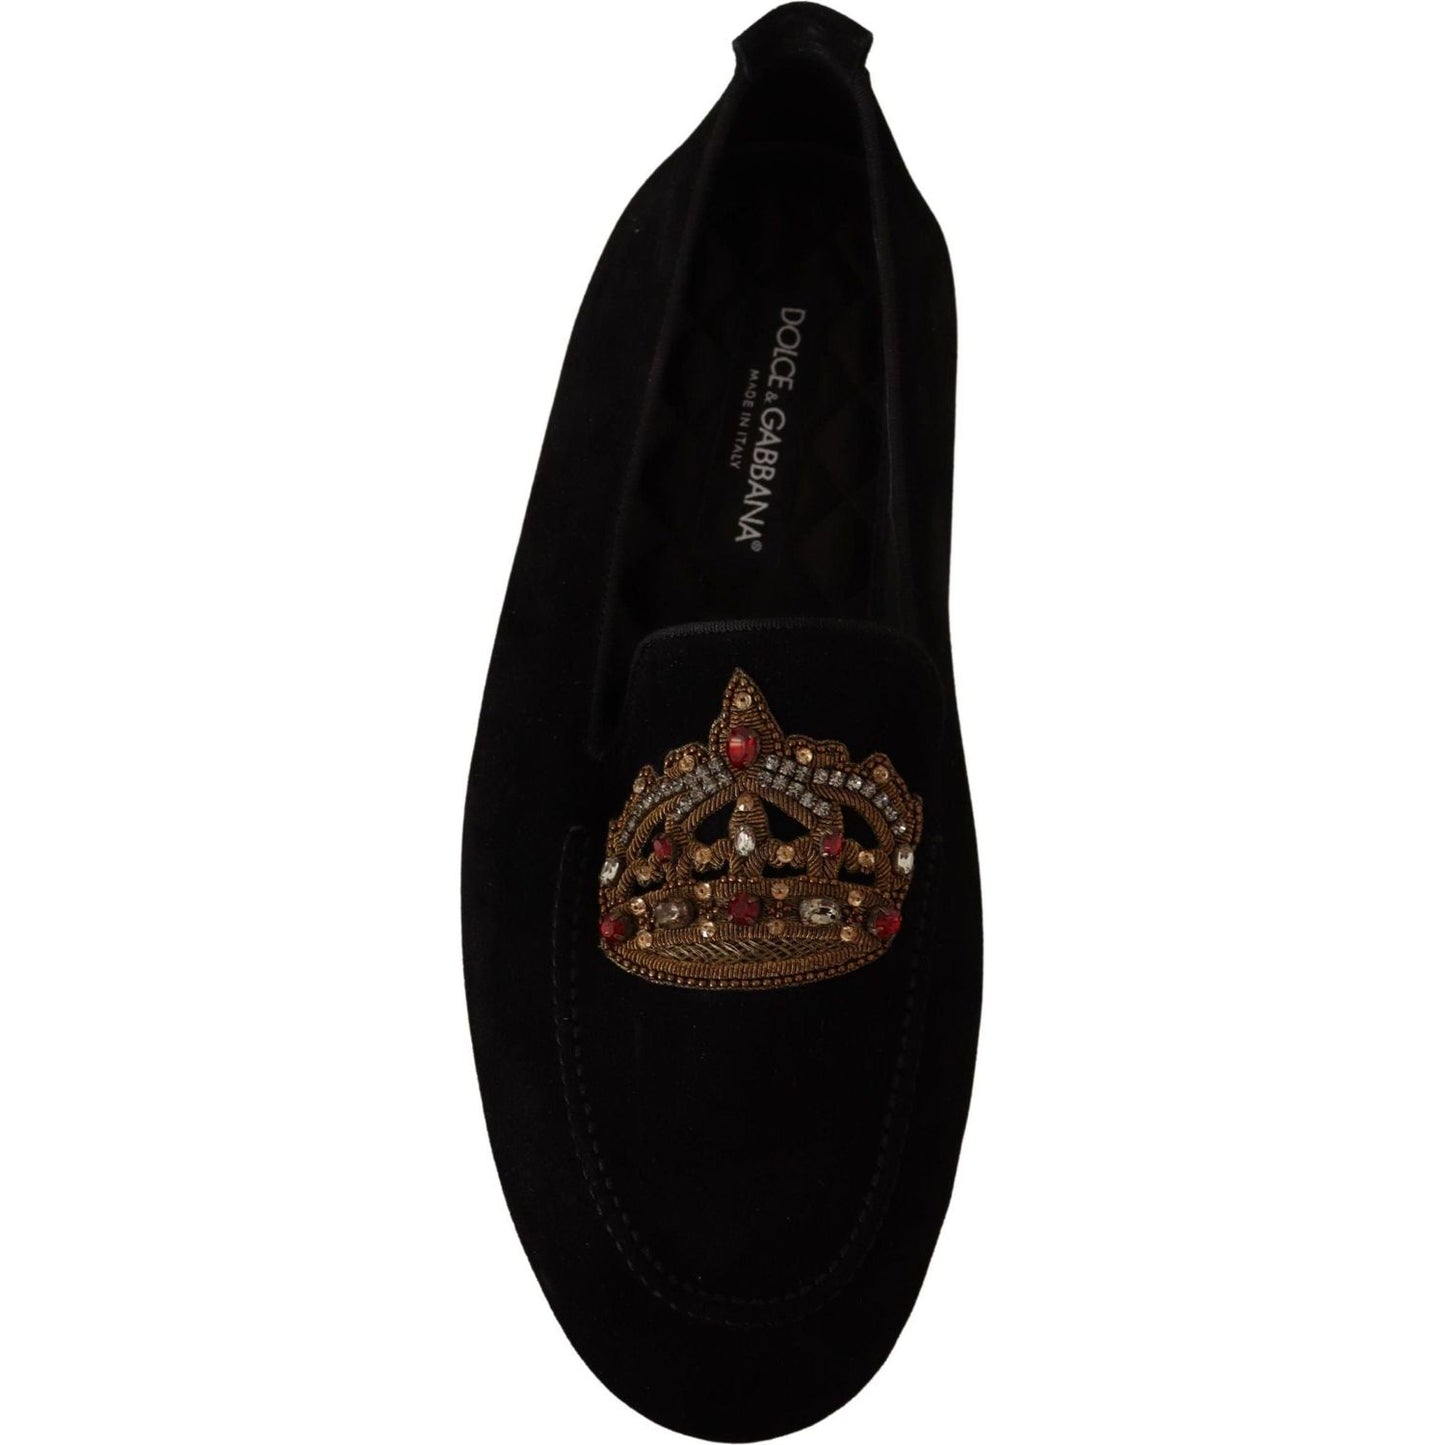 Dolce & Gabbana Elegant Black Leather Loafer Slides with Gold Embroidery black-leather-crystal-gold-crown-loafers-shoes IMG_5293-scaled-7814def6-d8a.jpg